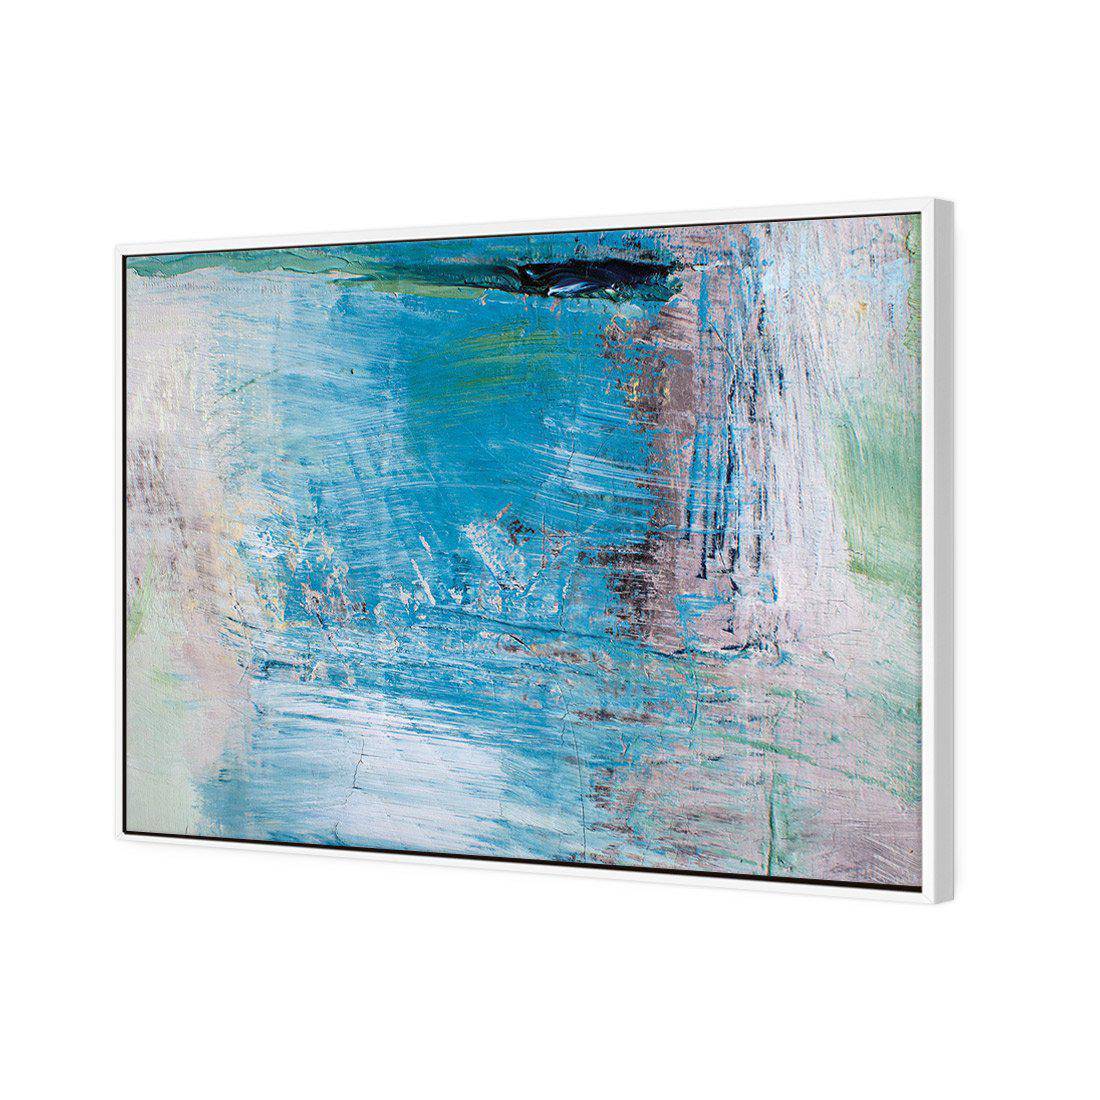 Painting The Clouds Canvas Art-Canvas-Wall Art Designs-45x30cm-Canvas - White Frame-Wall Art Designs